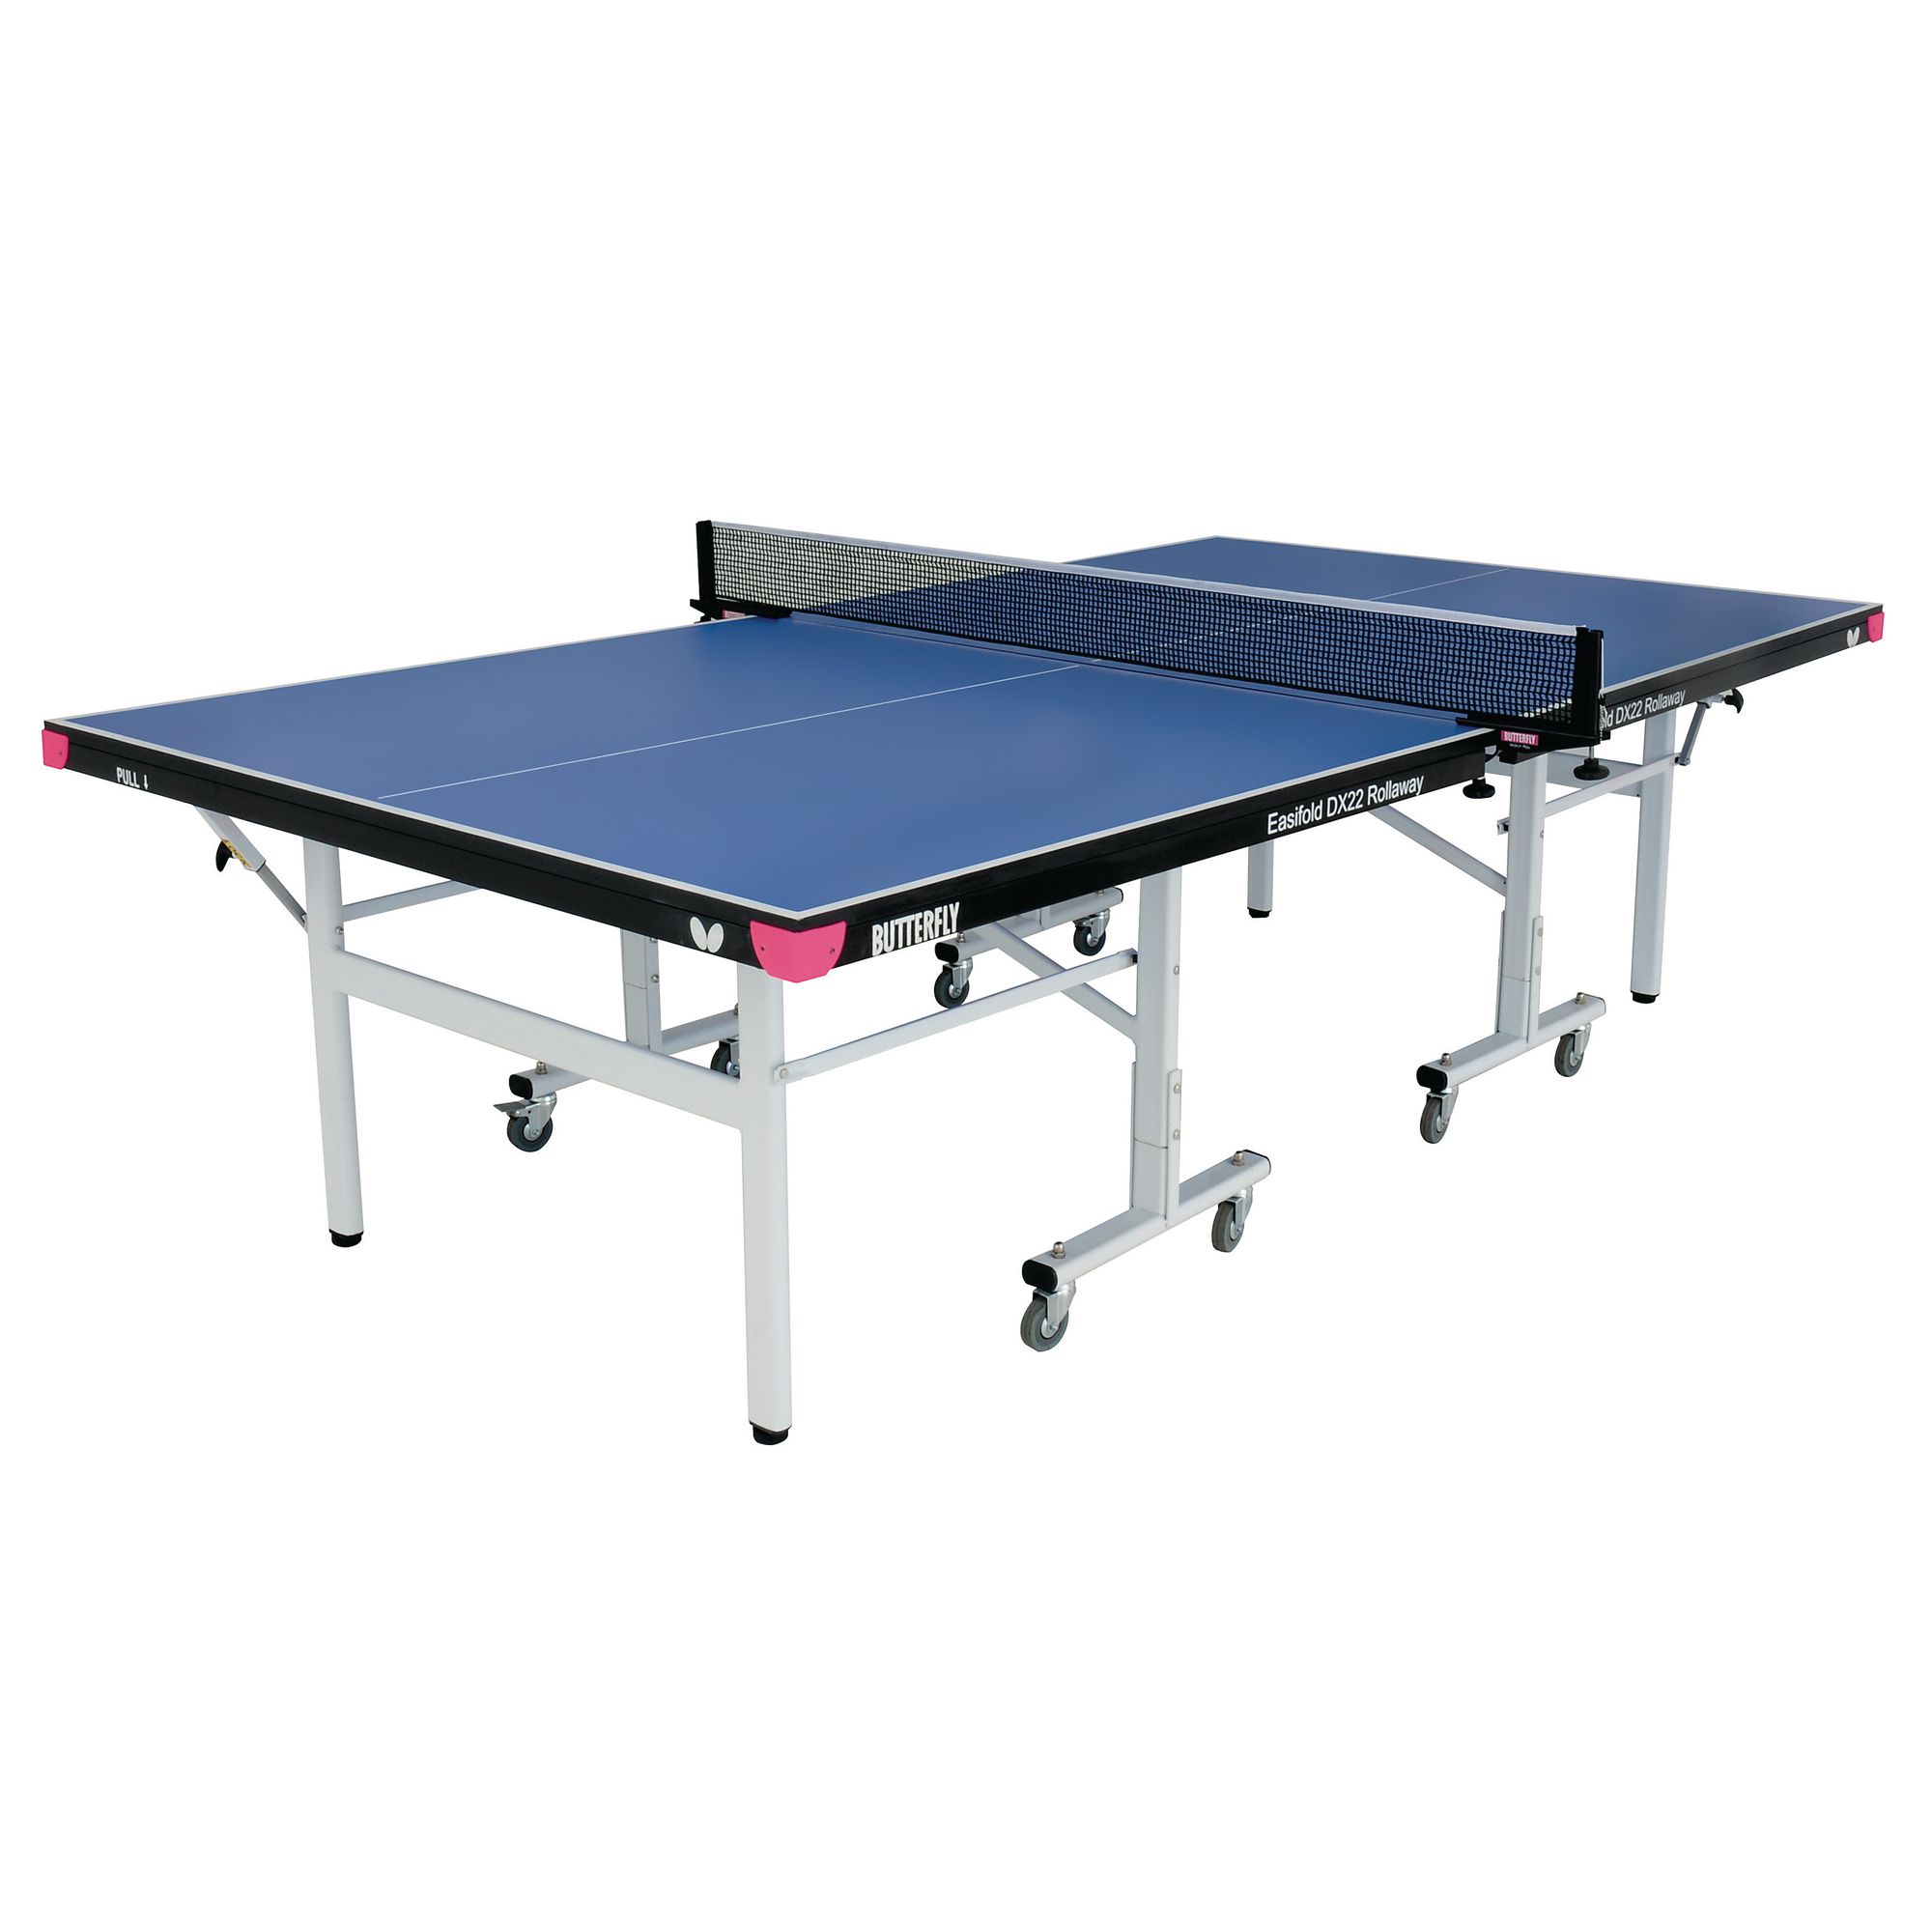 Itbp07197 Butterfly Easifold Dx22 Table Tennis Table Blue